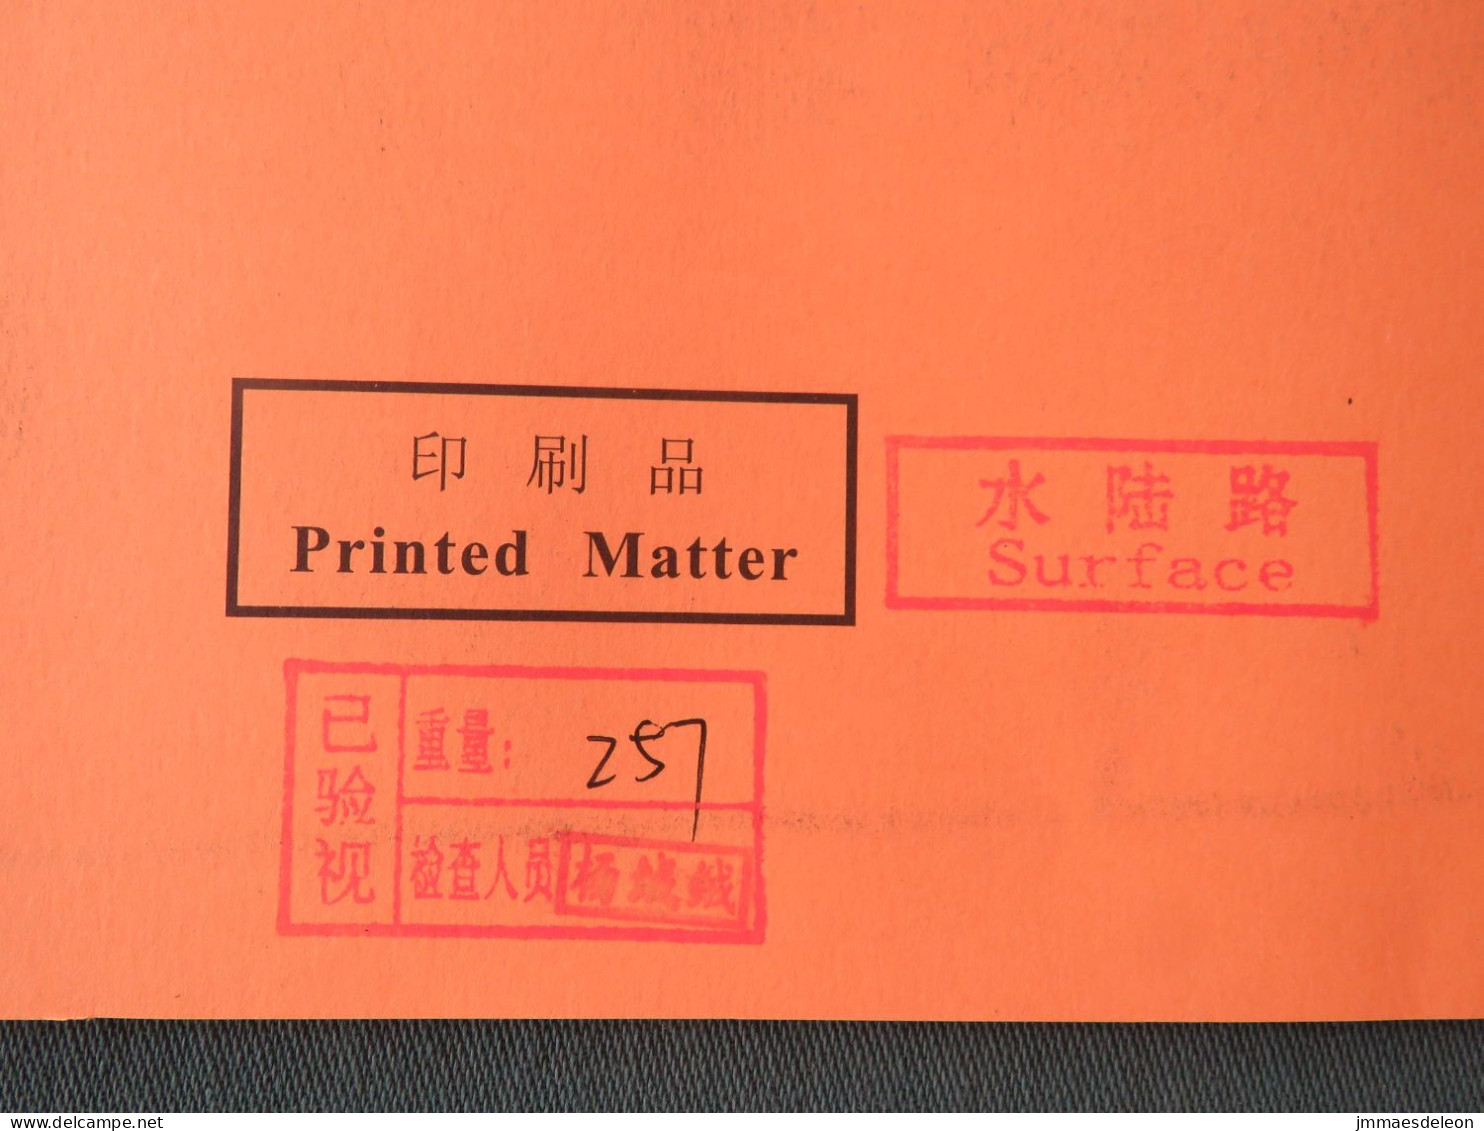 China 2023 Front Of Cover To Nicaragua - Machine Franking - Lettres & Documents